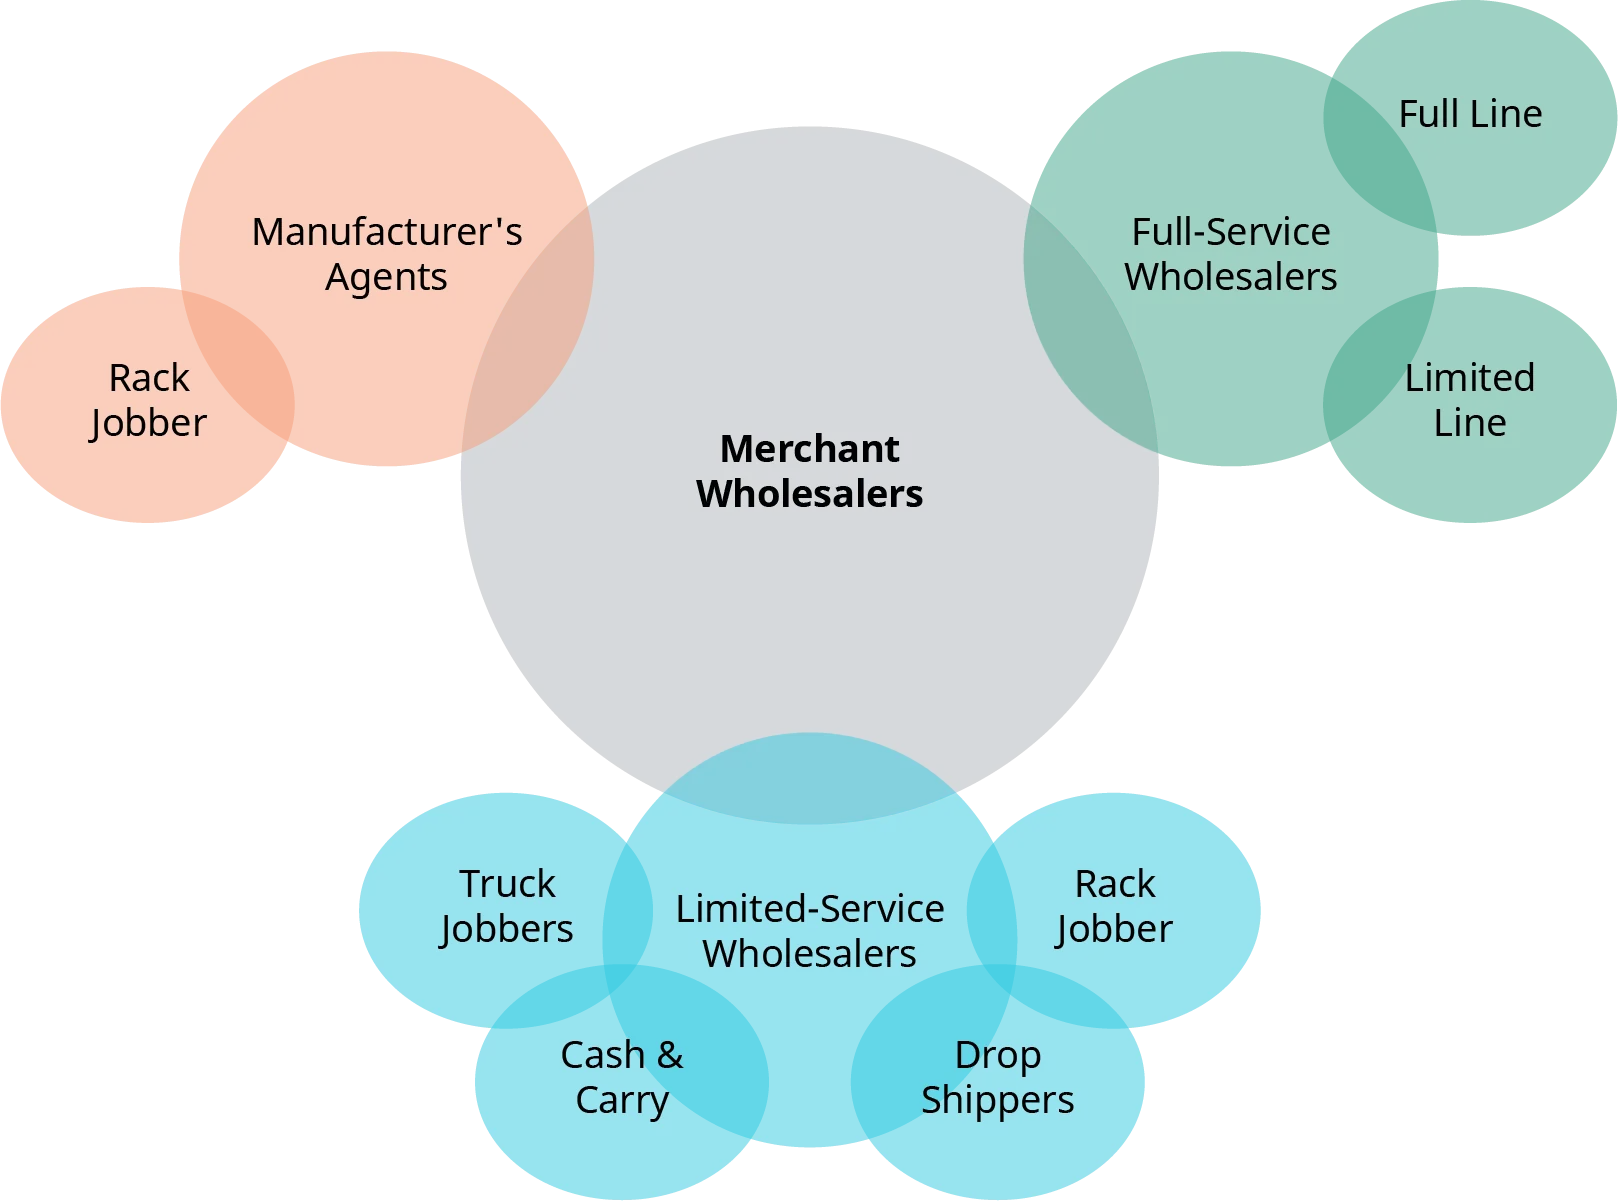 A diagram uses overlapping circles shows the different types of wholesalers. The largest circle in the center is merchant wholesalers. Three slightly smaller circles slightly overlap Merchant Wholesalers - but not each other. These circles are labelled manufacture’s agents, full service wholesalers, and limited service wholesalers. Each of these circles has slightly smaller circles overlapping them. Rack jobber is grouped with manufacture’s agents. Full line and limited line are grouped with full service wholesalers. Rack jobber, drop shipper, cash and carry, and truck jobbers are grouped with limited service wholesalers.